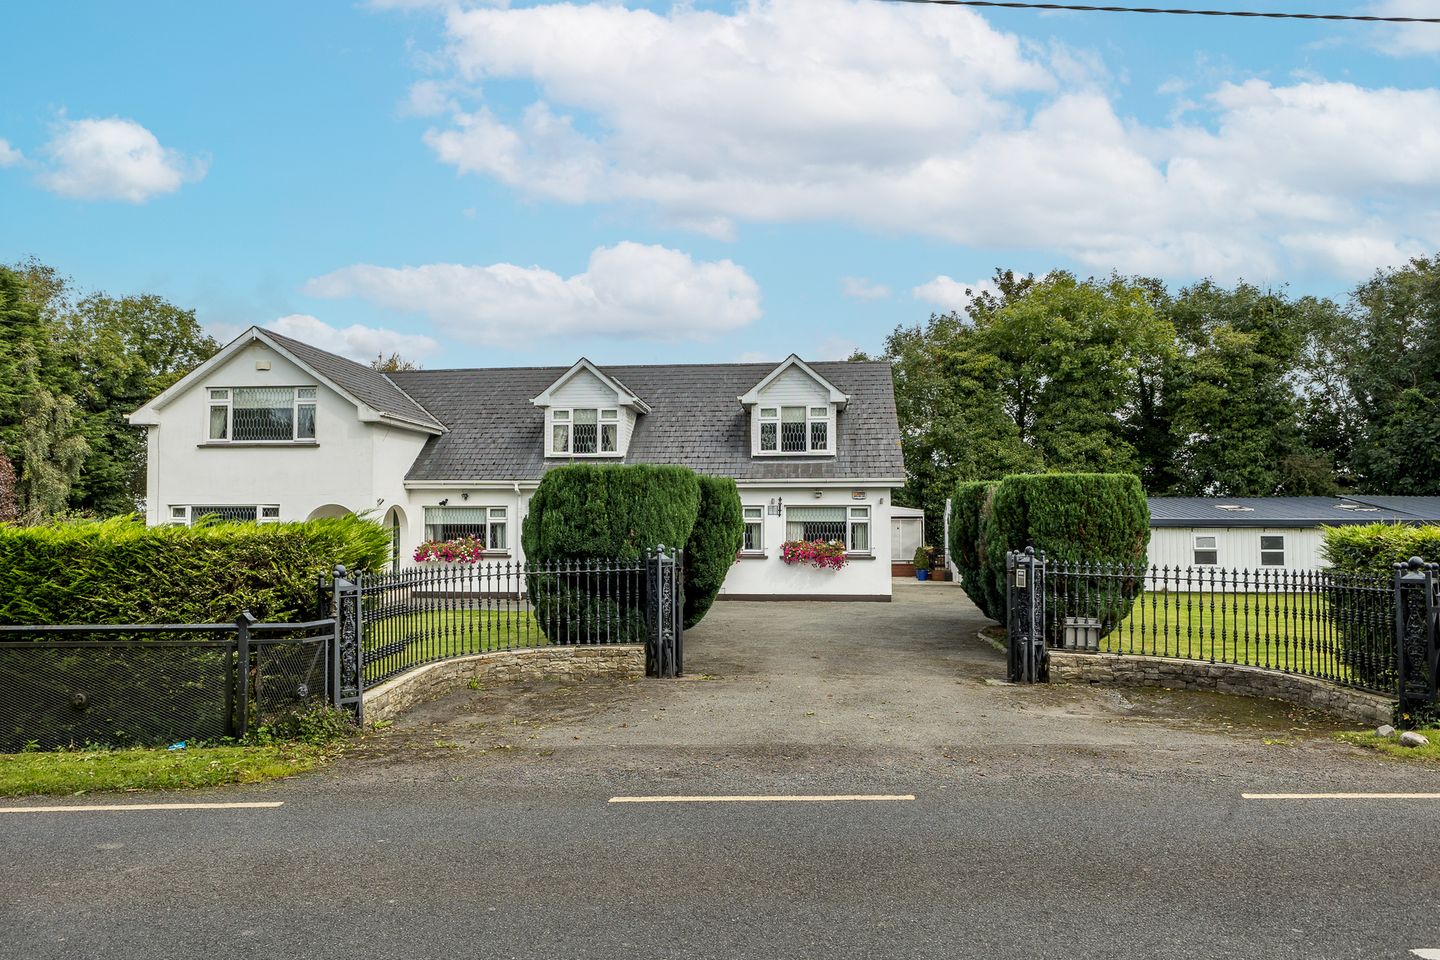 Inishowen, Peacockstown, Ratoath, Co. Meath, D15RCX7